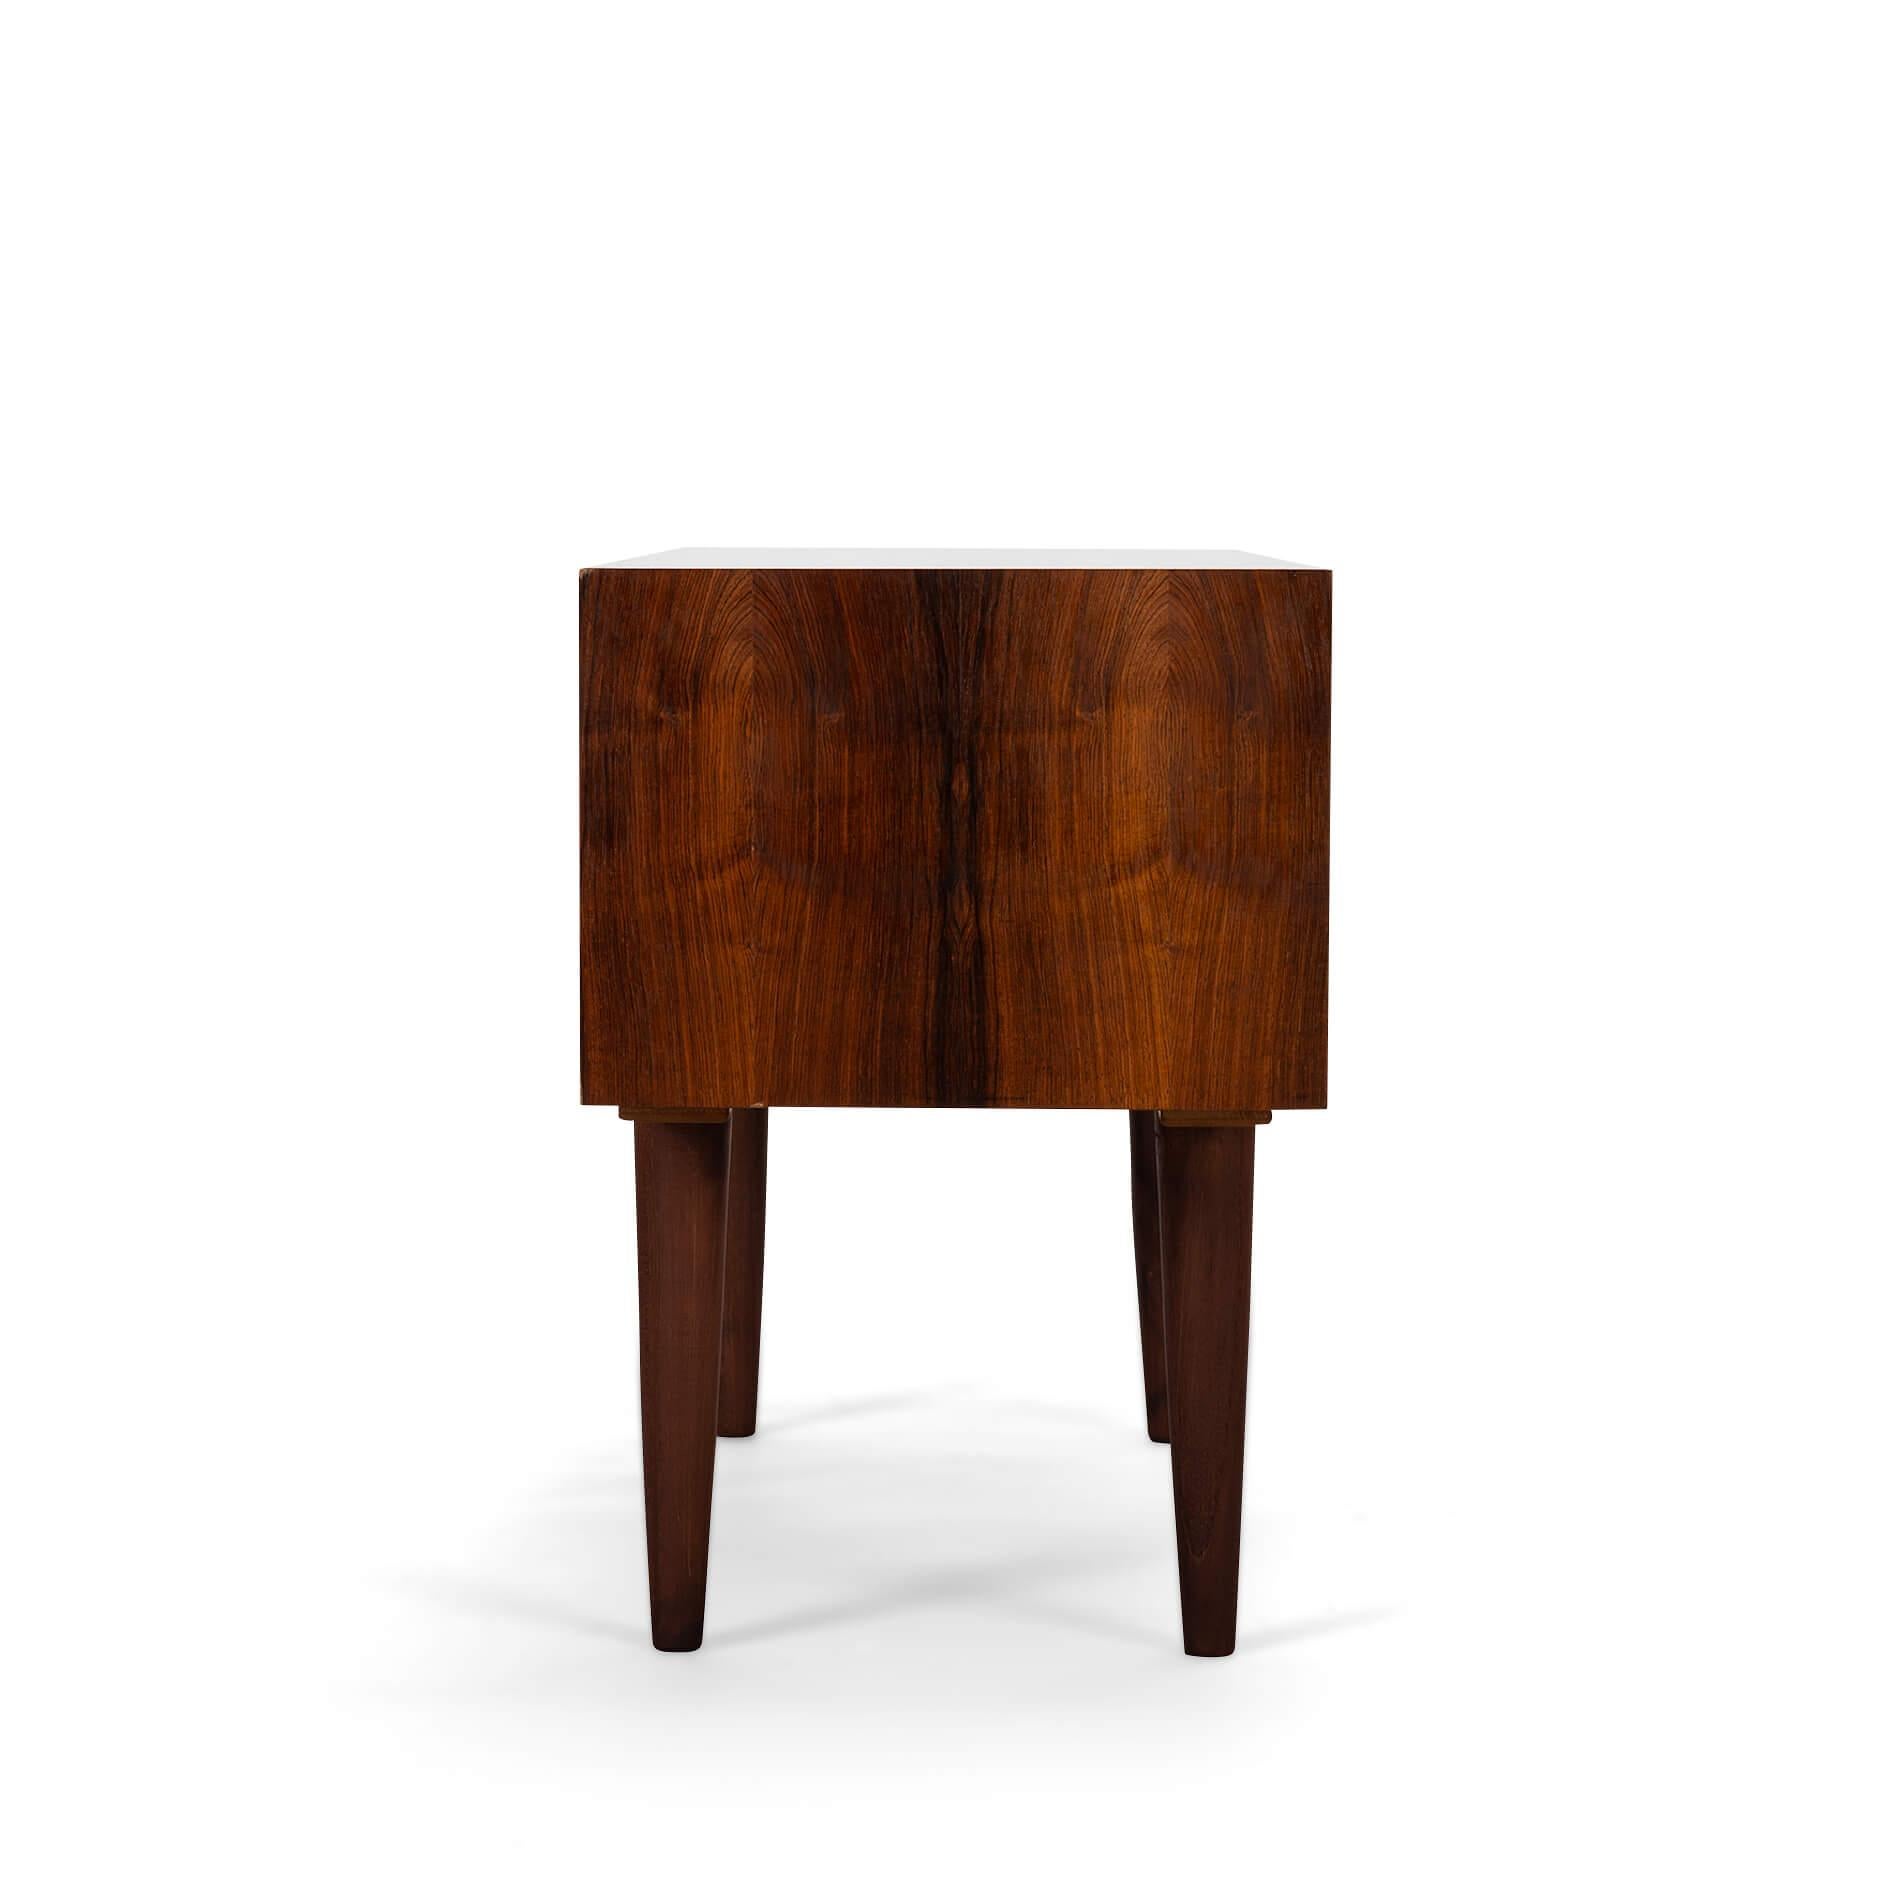 Danish Design by Kai Kristiansen This stylish chest of drawers was designed by Kai Kristiansen and produced by Feldballes Møbelfabrik in the 1960s. This cabinet is made of rosewood and has beautiful detailed lines with his signature eyelid handles,